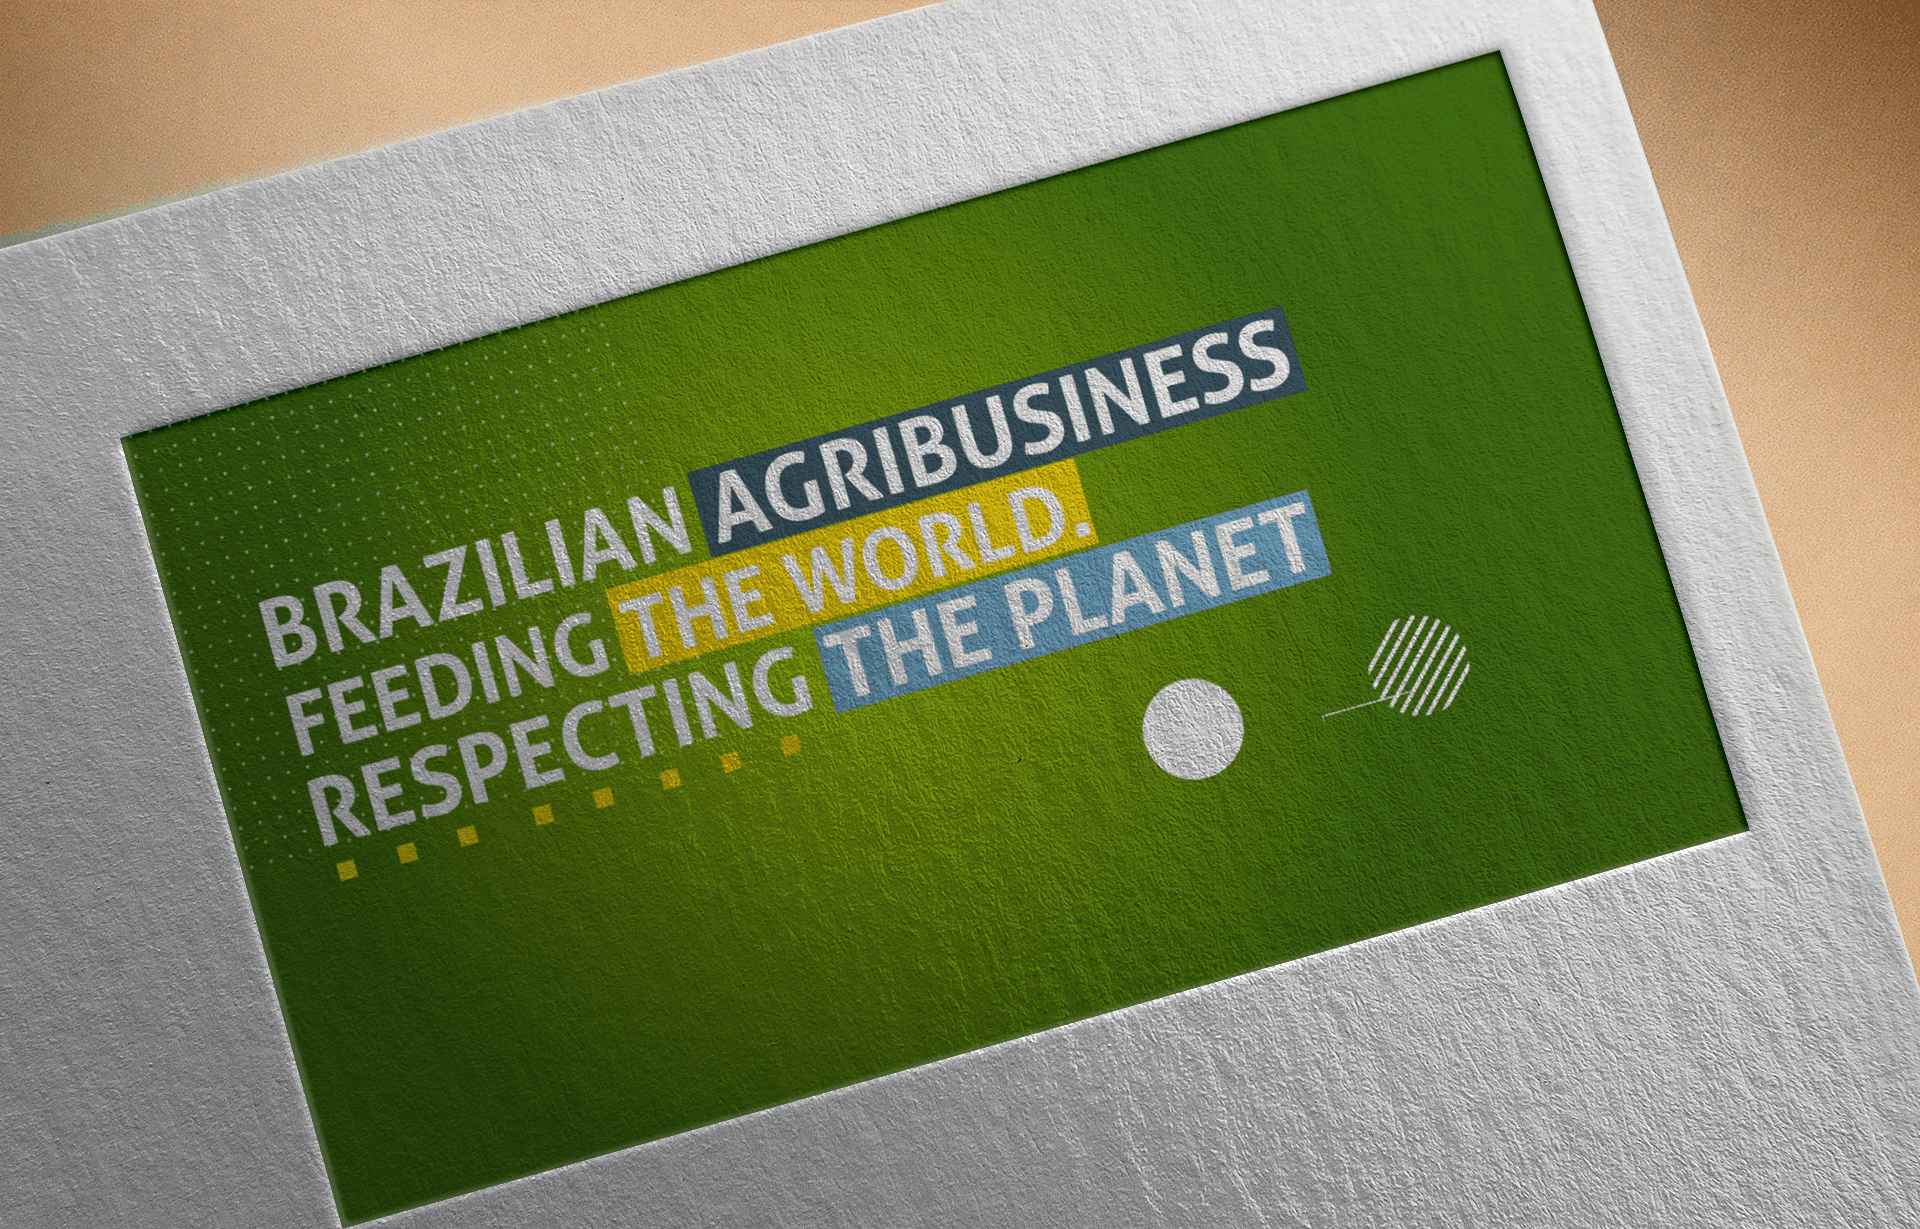 Brazilian Agribusiness. Feed the world, respect the planet